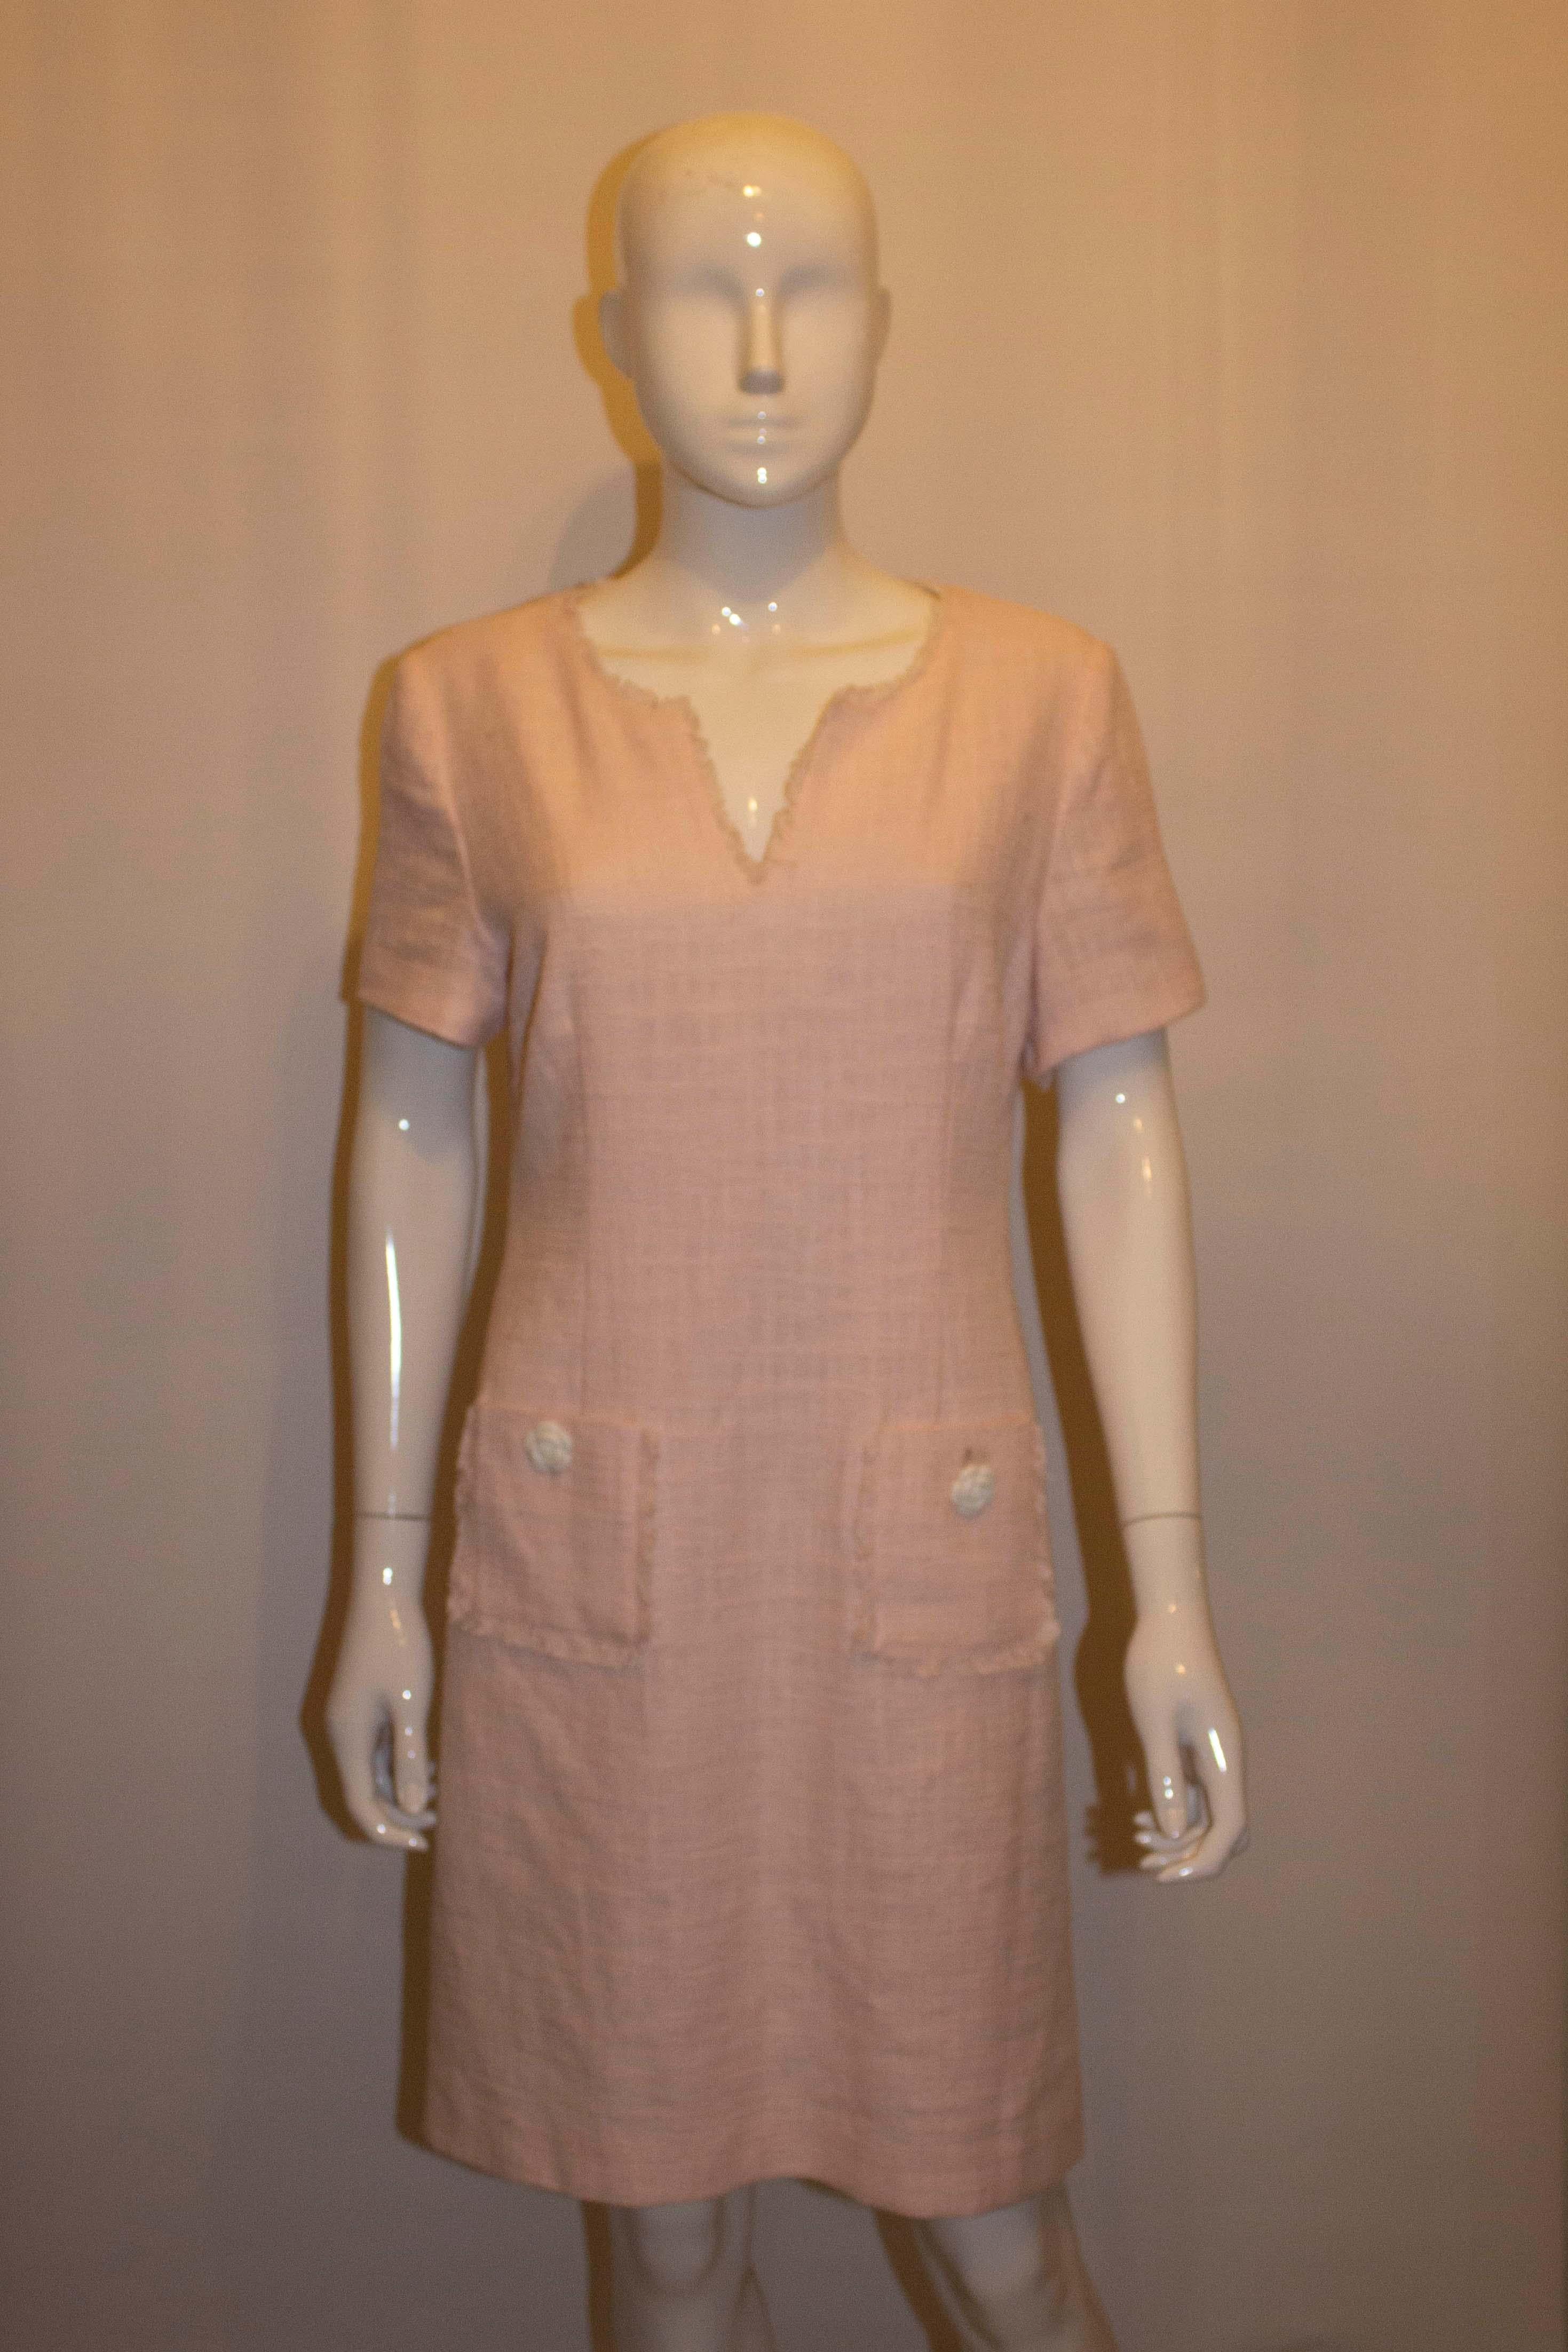 A pretty pink shift dress by Karl Lagerfled, Paris line. The  dress is in a pretty shade of pink, and has two pockets on the front , shorts sleaves and  is fully lined. 
Size 10, measurements : bust up to 38'', length 37''